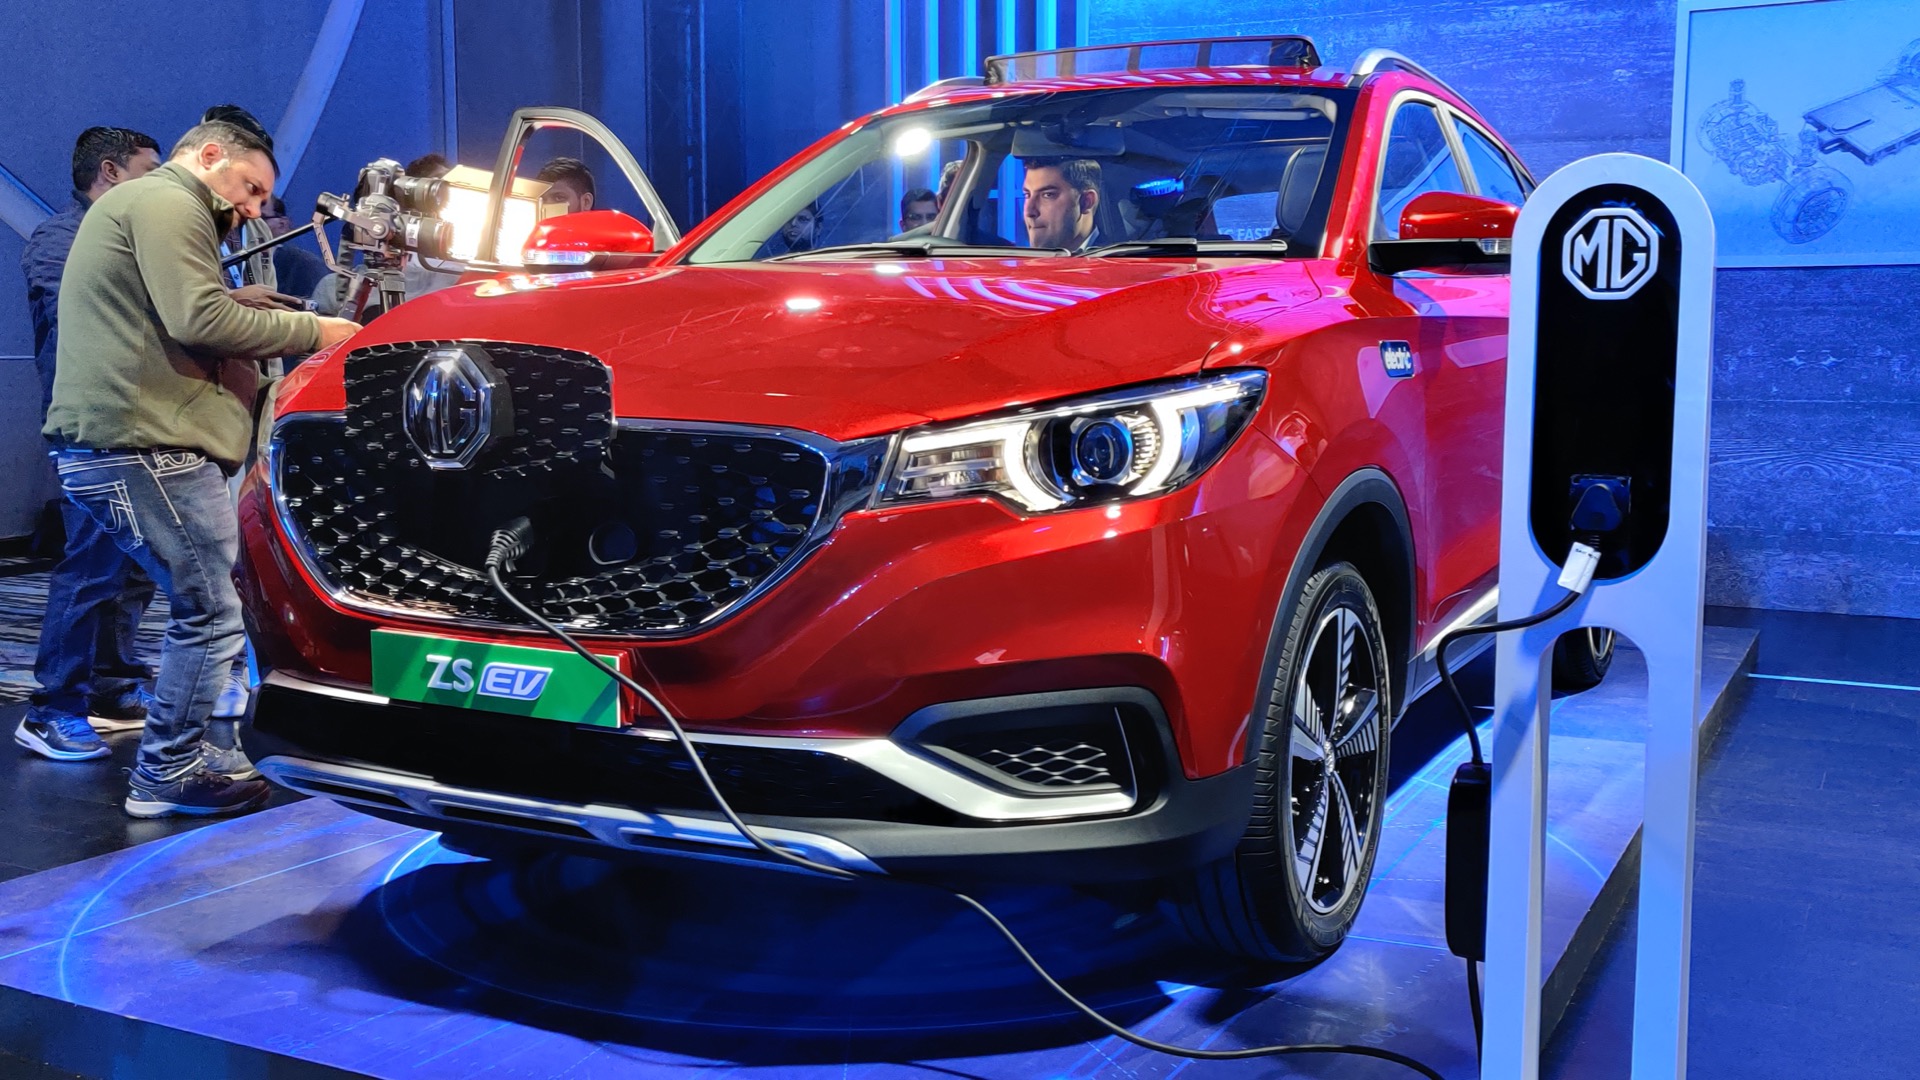 MG Motor announces ZS EV, its first electric car in India TechRadar